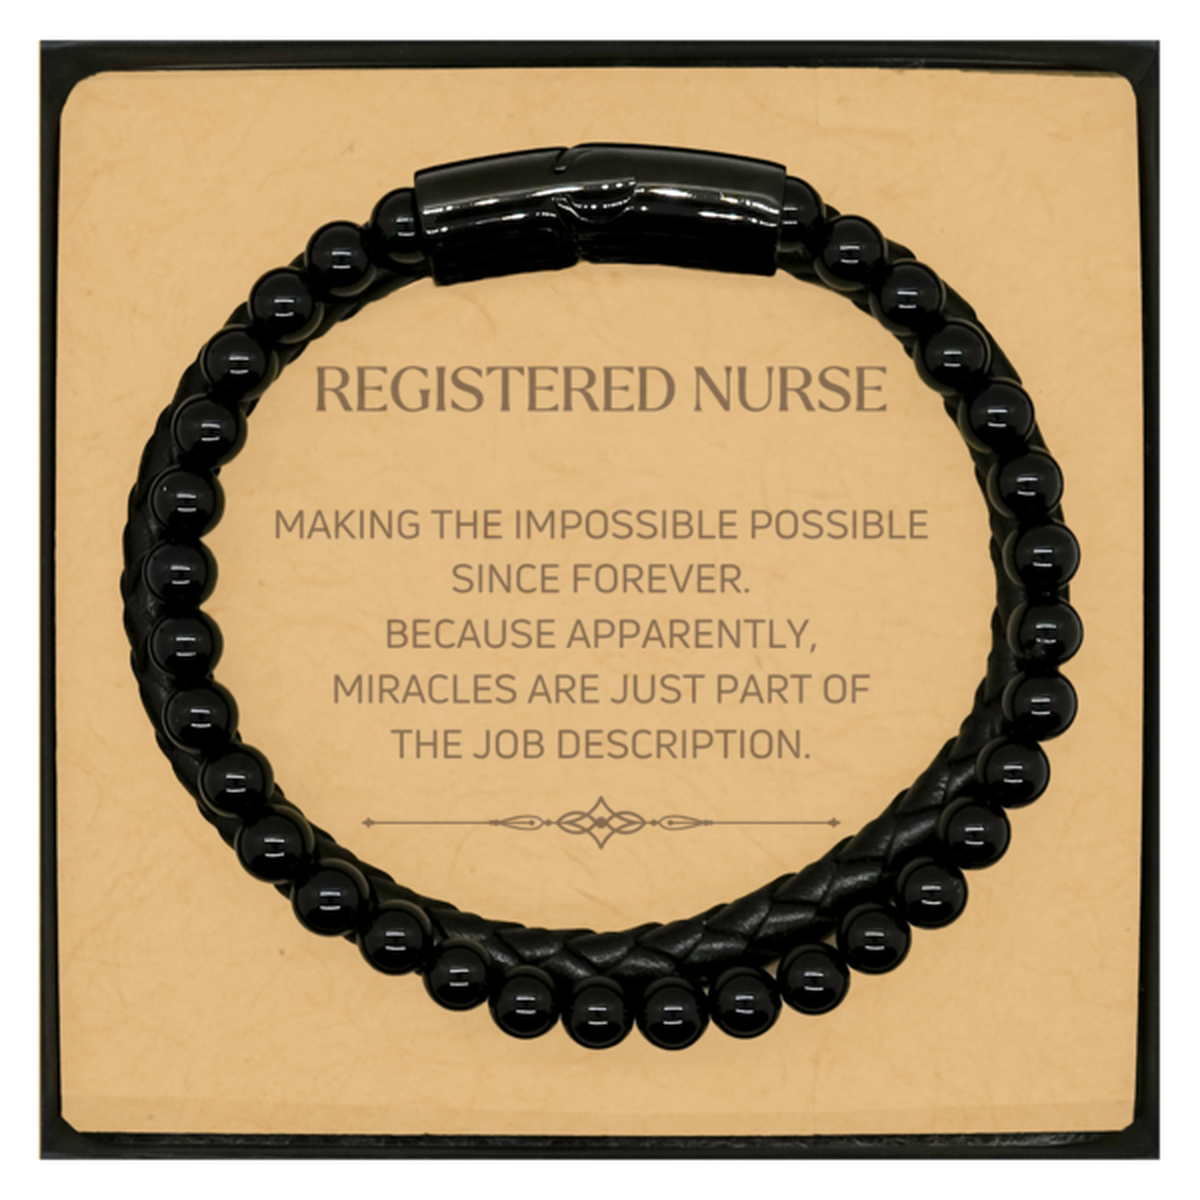 Funny Registered Nurse Gifts, Miracles are just part of the job description, Inspirational Birthday Christmas Stone Leather Bracelets For Registered Nurse, Men, Women, Coworkers, Friends, Boss